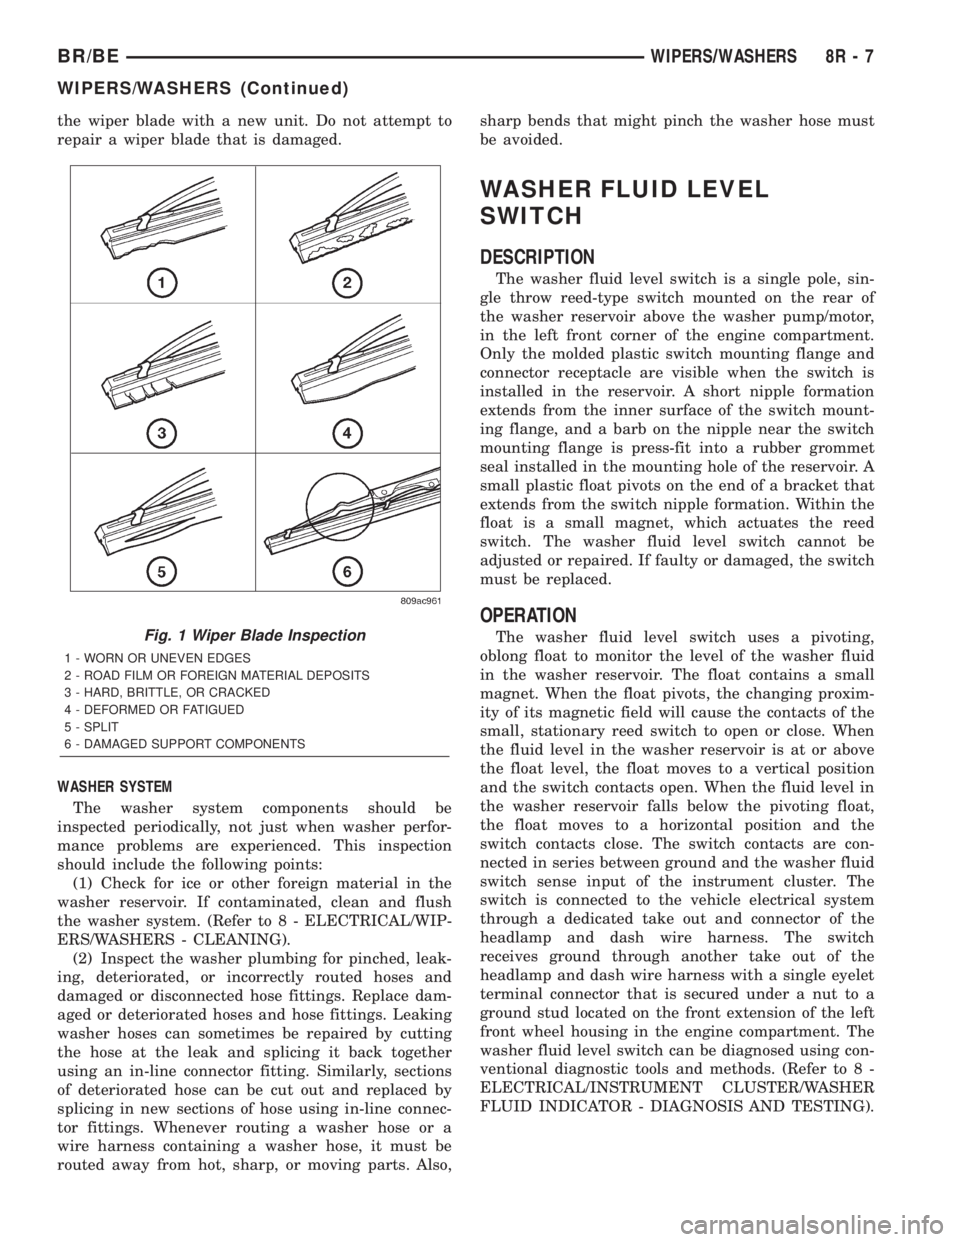 DODGE RAM 2002  Service Service Manual the wiper blade with a new unit. Do not attempt to
repair a wiper blade that is damaged.
WASHER SYSTEM
The washer system components should be
inspected periodically, not just when washer perfor-
mance